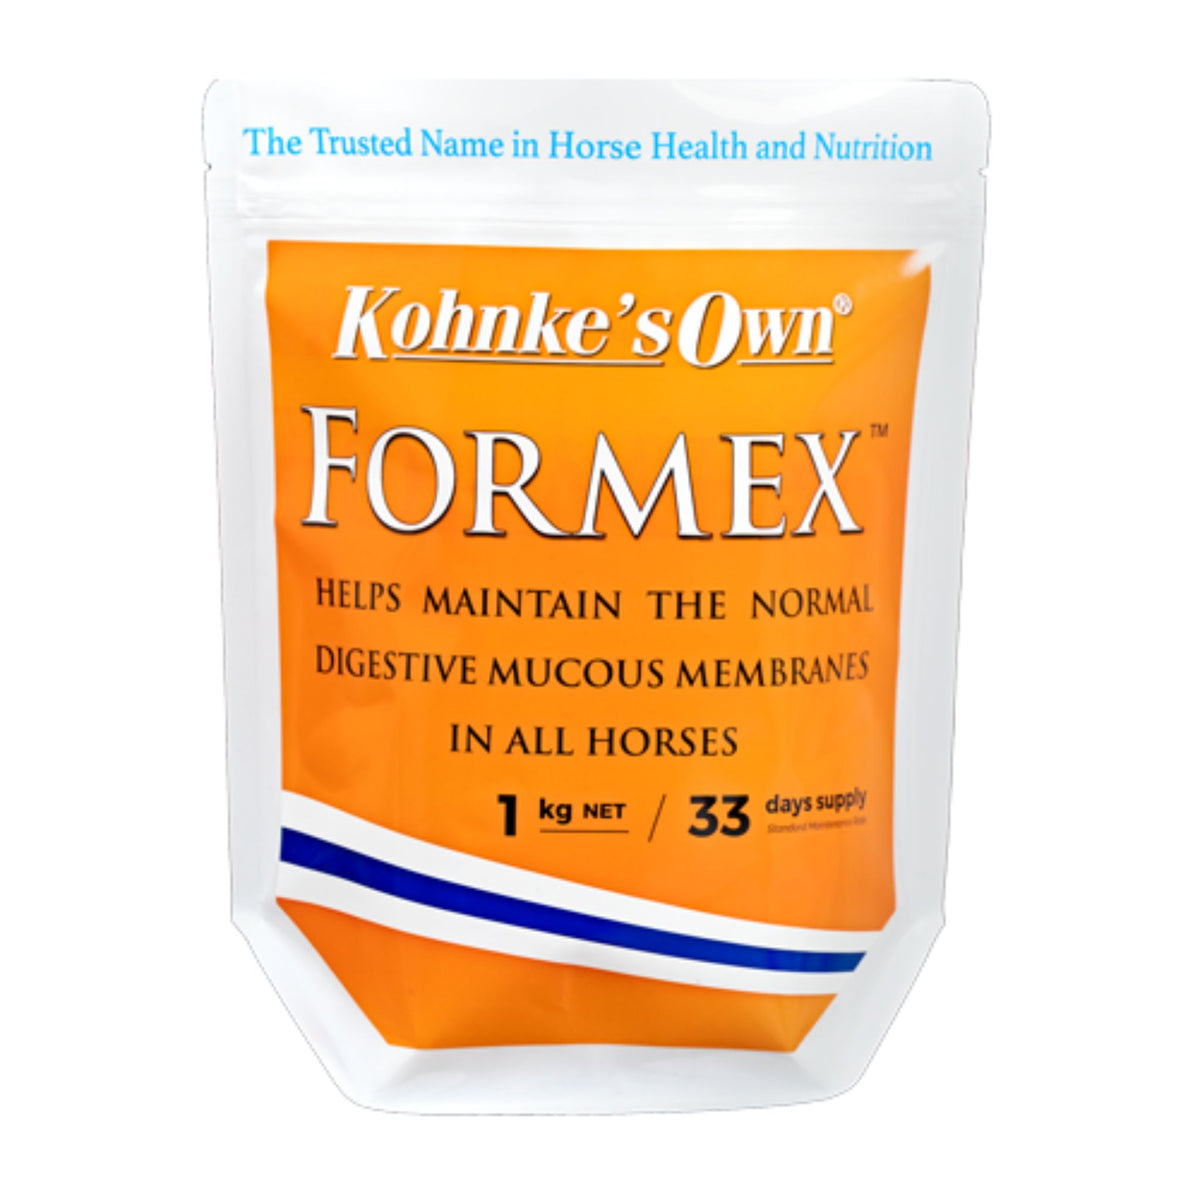 Packet of Formex with glossy white finish and sealed top.